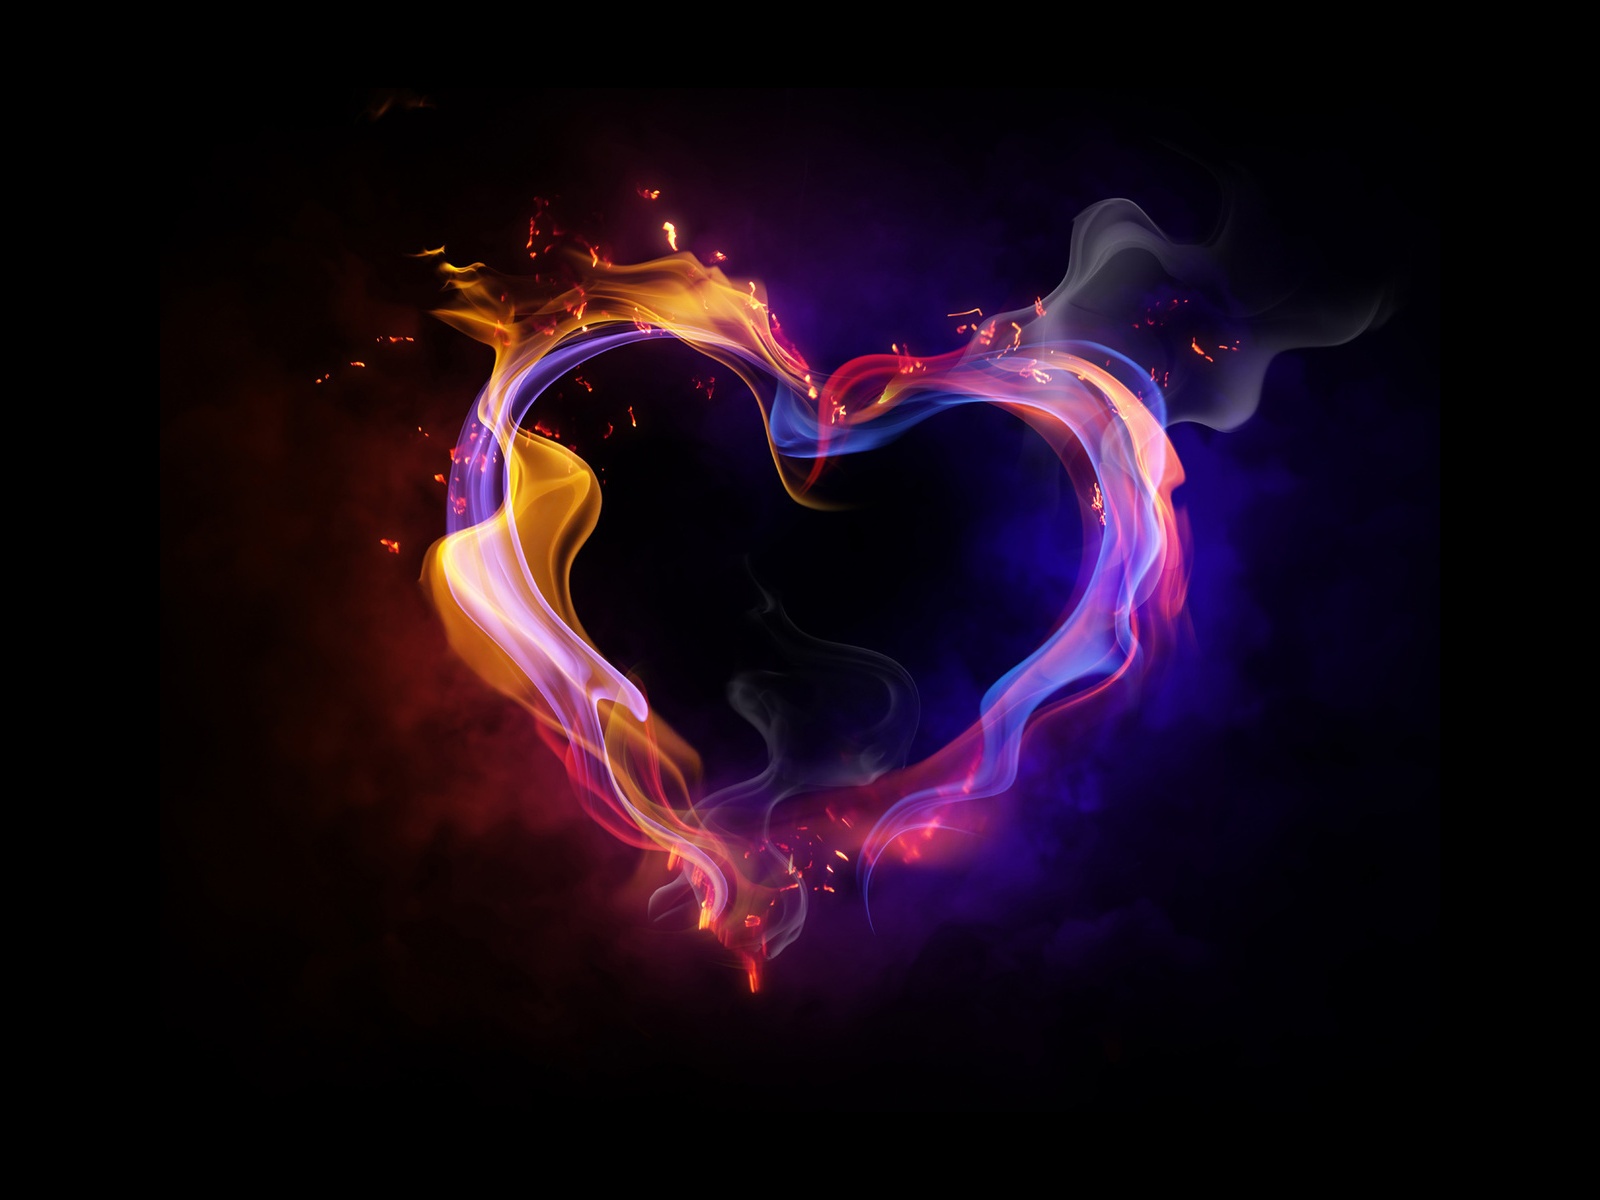 Heart Abstract Love Colors HD Wallpaper Epic Desktop Background